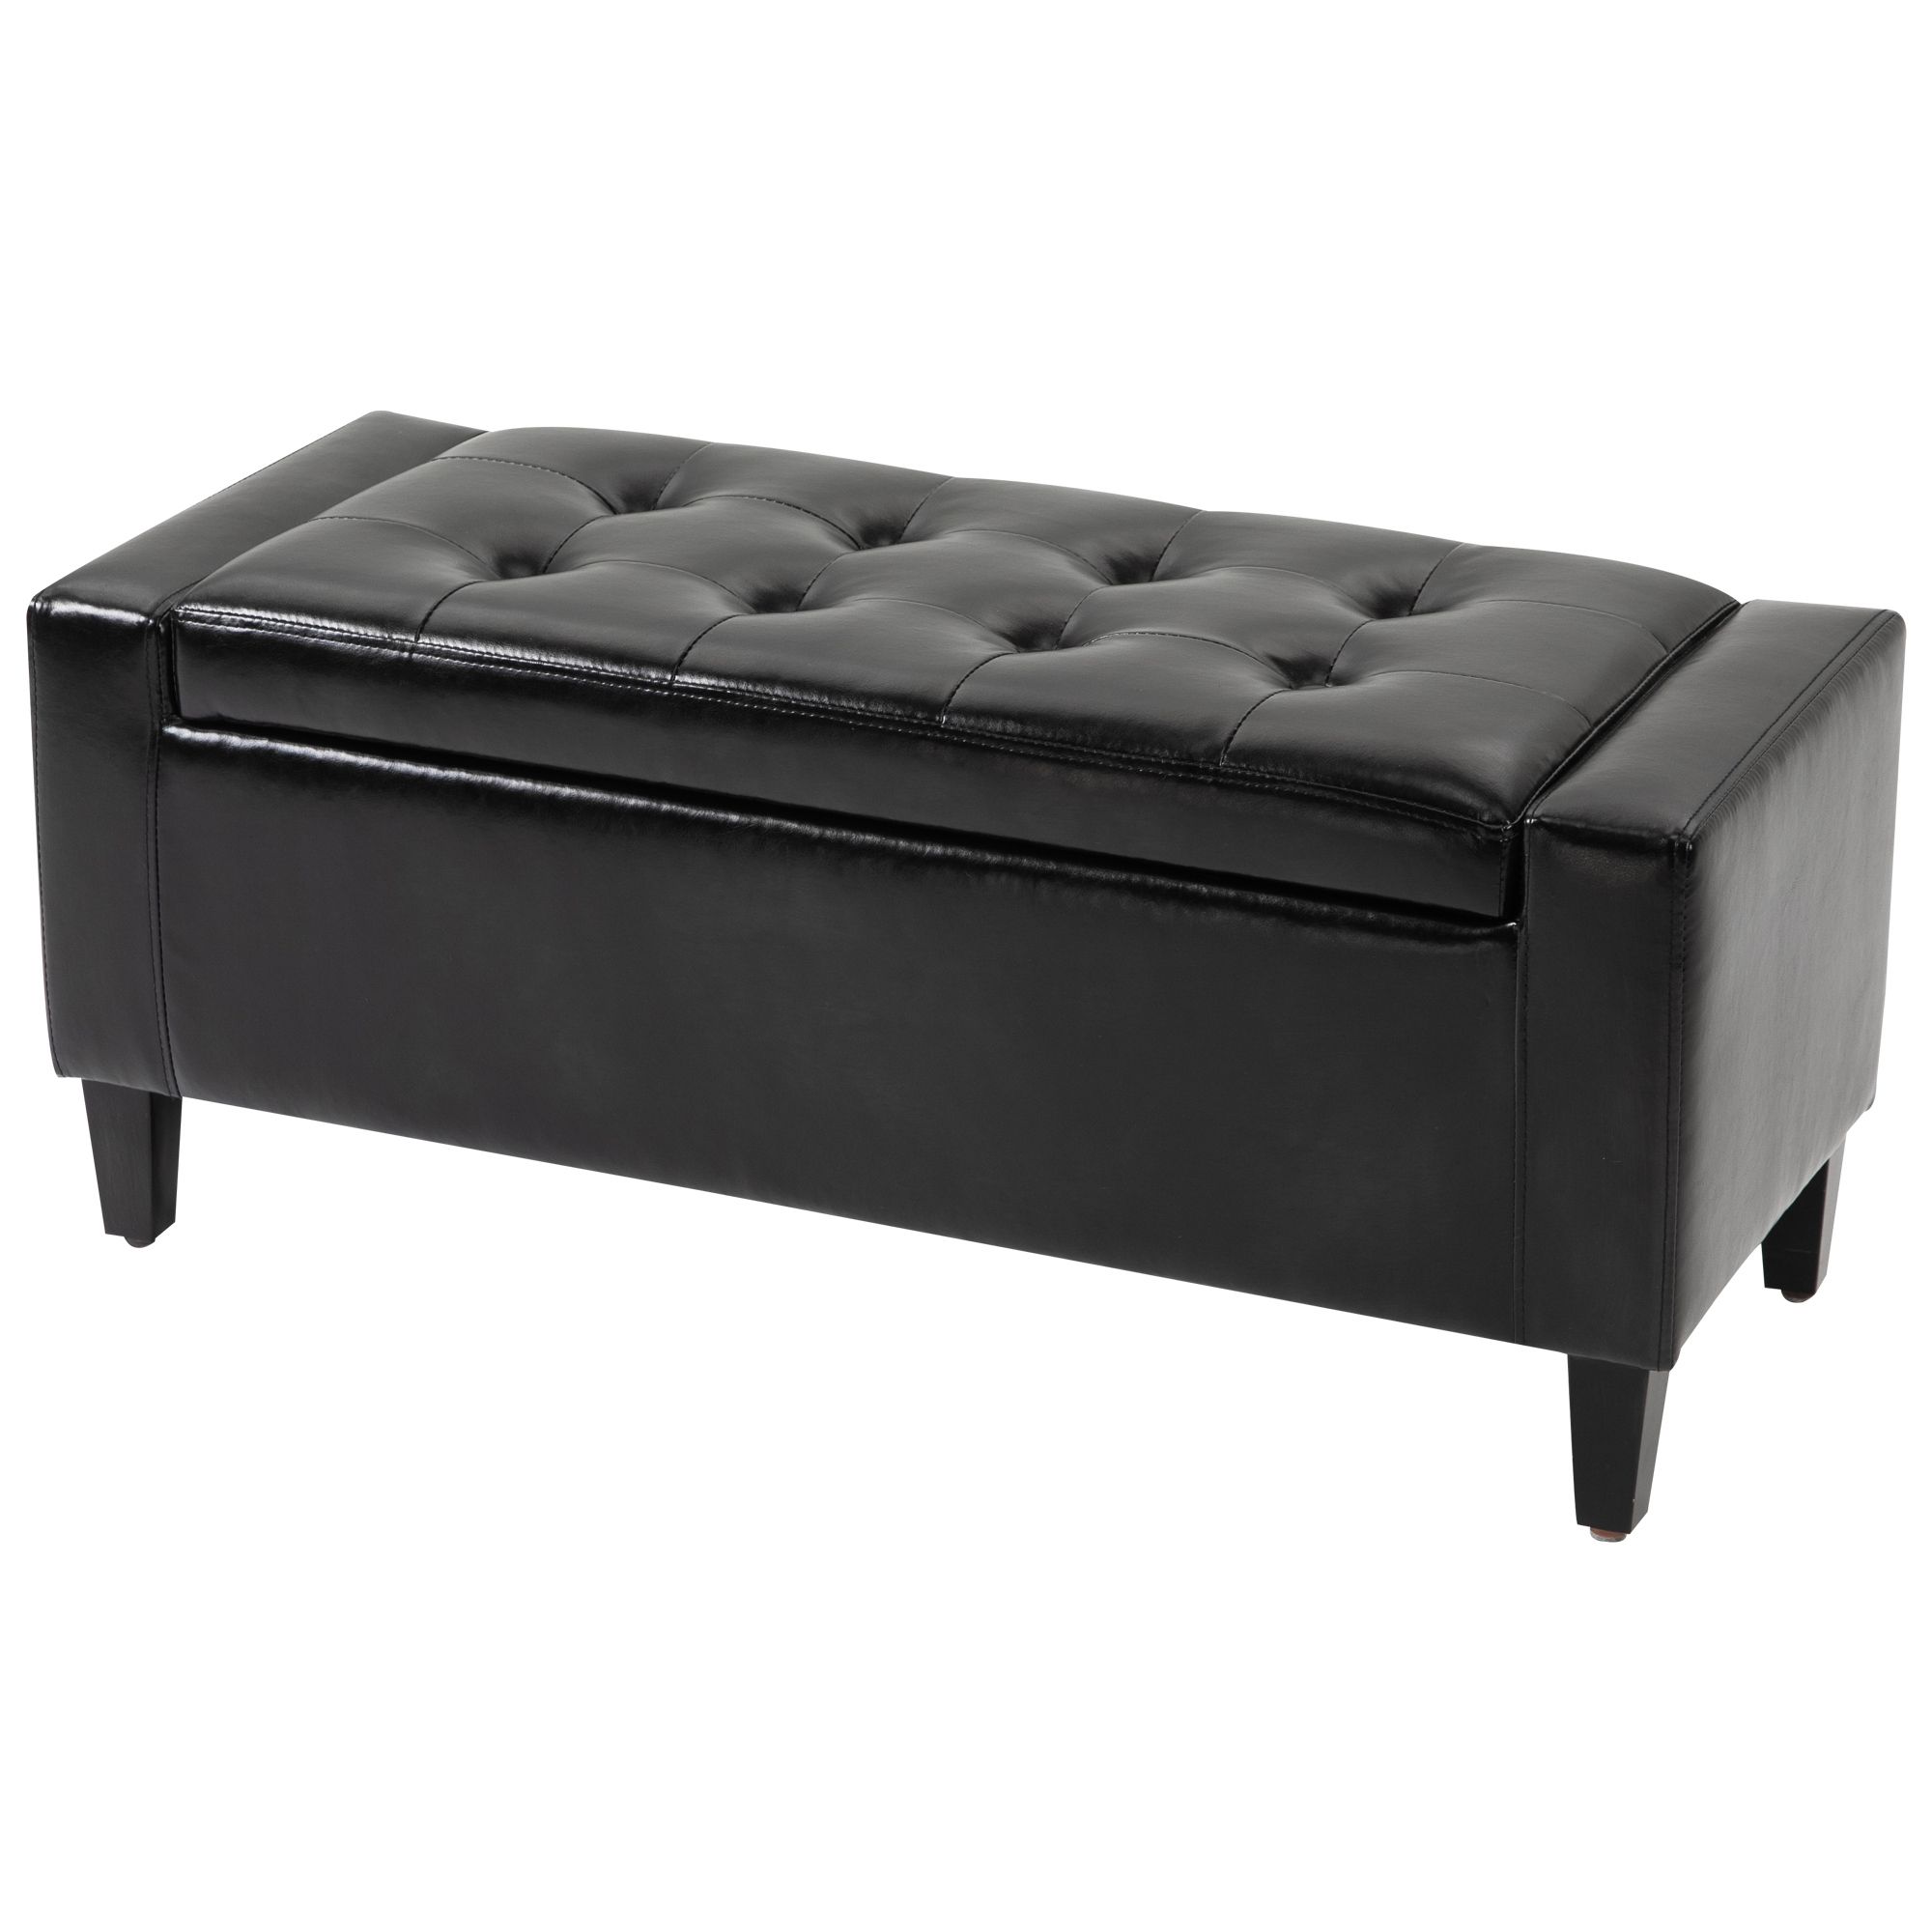 Recent Homcom Pu Leather Upholstered Lift Top Tufted Ottoman Black, Ottoman Regarding Black Leather And Bronze Steel Tufted Ottomans (View 3 of 10)